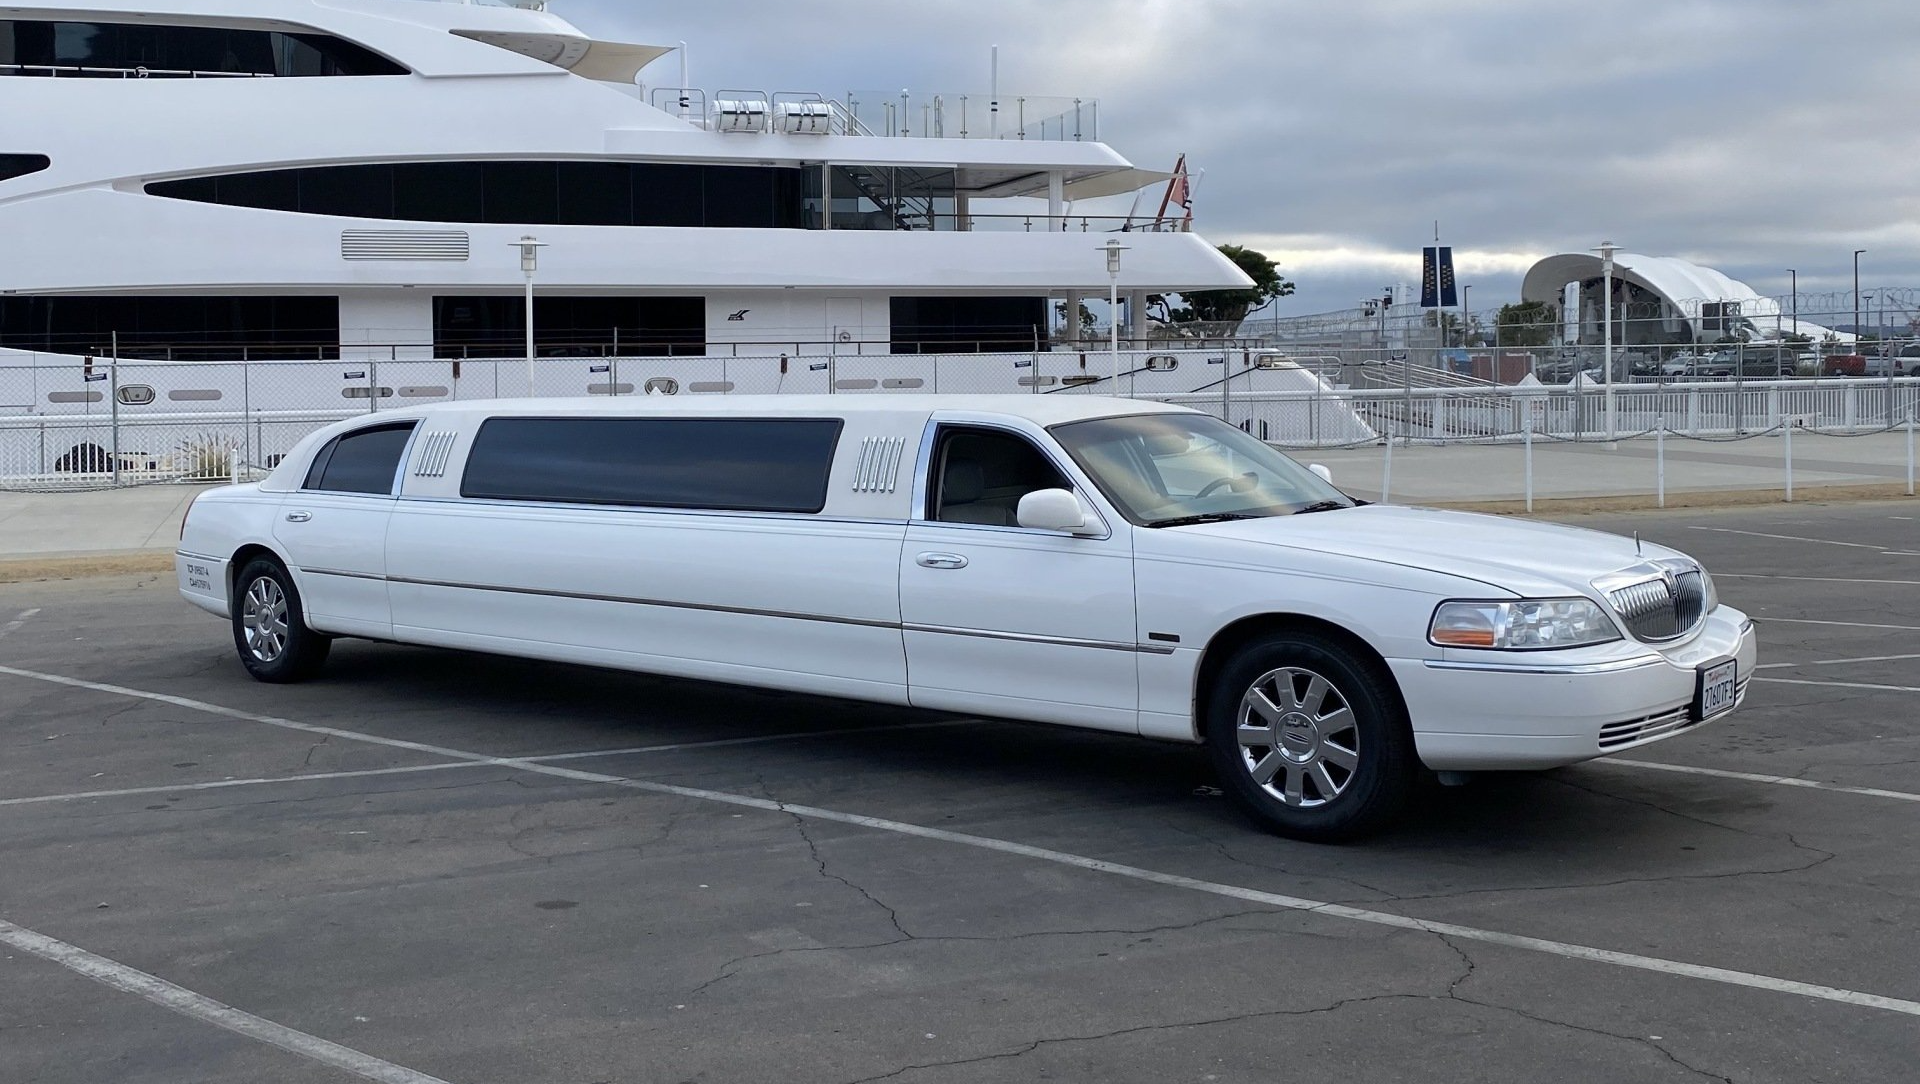 a white limousine is parked in front of a large white boat .